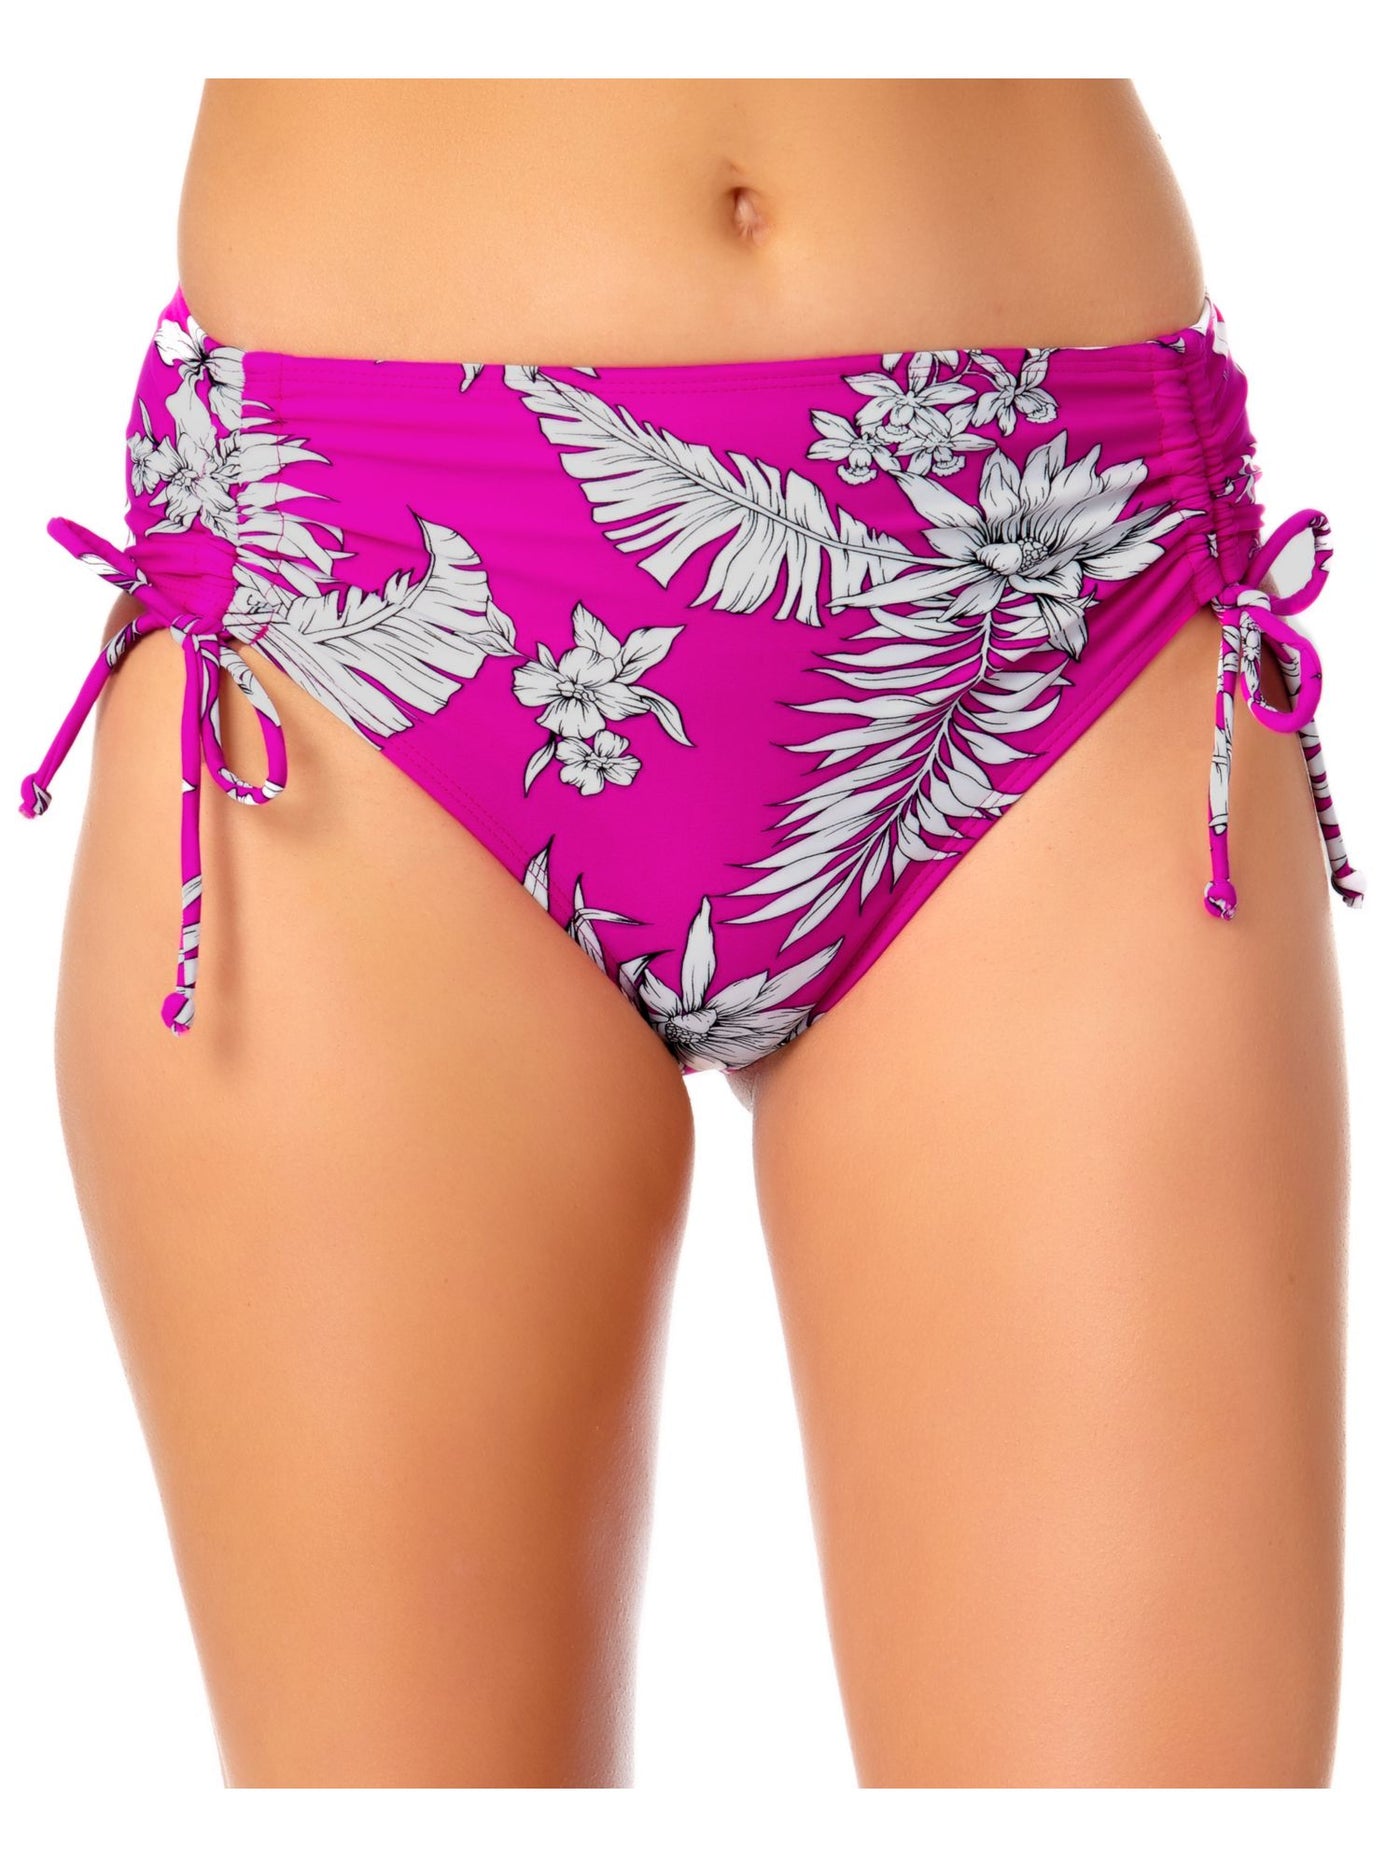 California Waves Women's Multi Color Floral Stretch Tie Details Lined Moderate Coverage Side Tie Swimsuit Bottom S